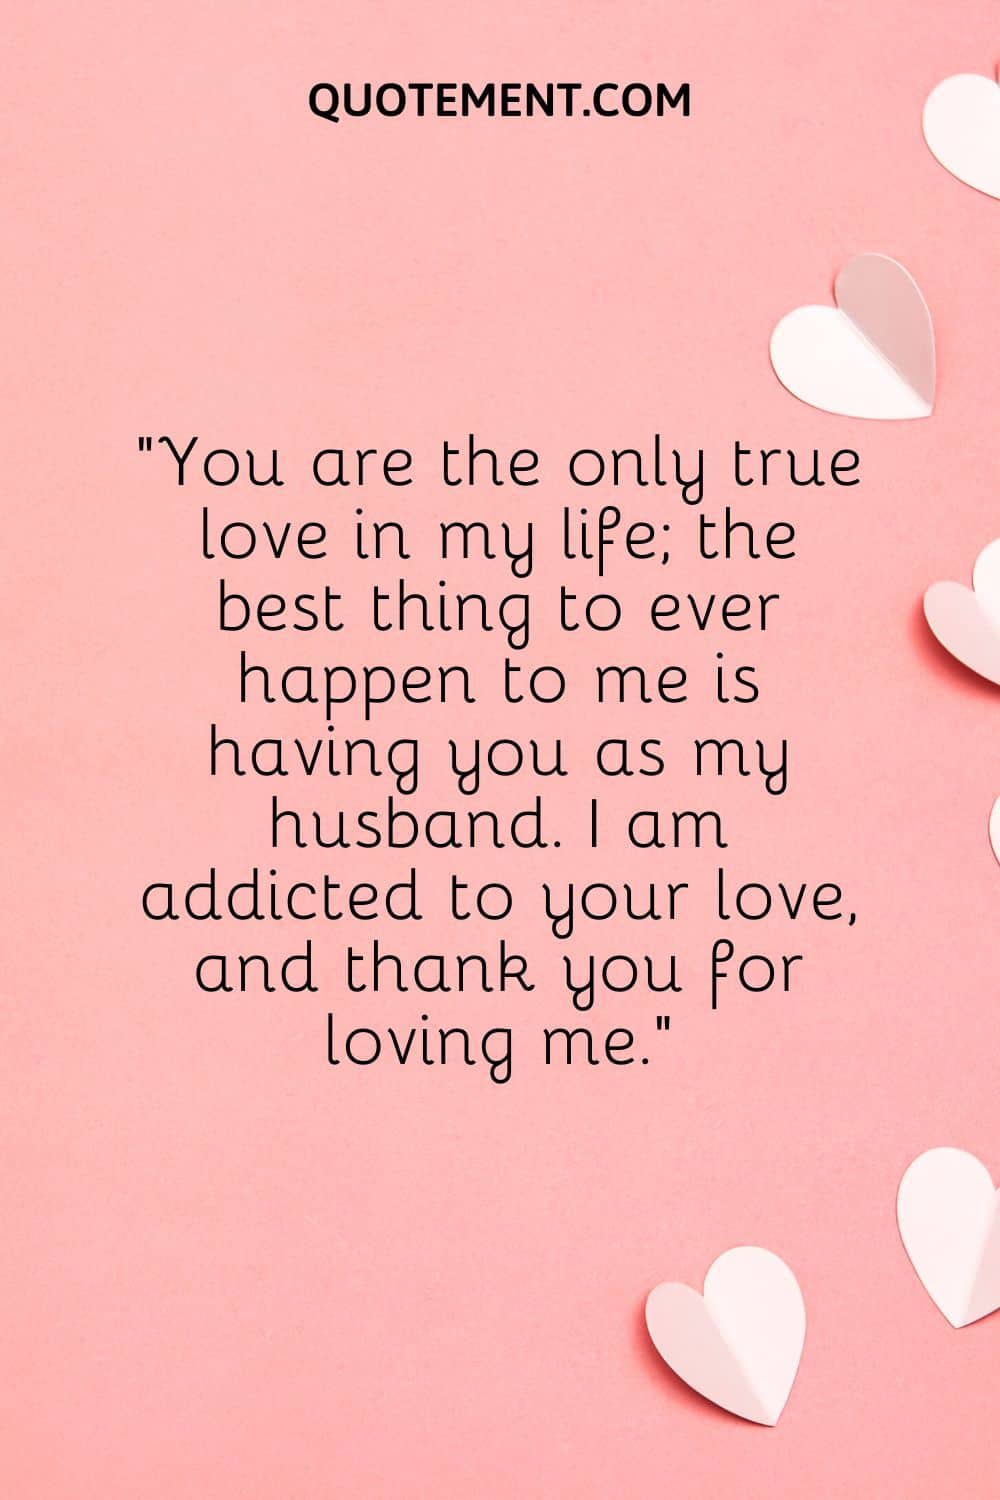 You are the only true love in my life; the best thing to ever happen to me is having you as my husband.